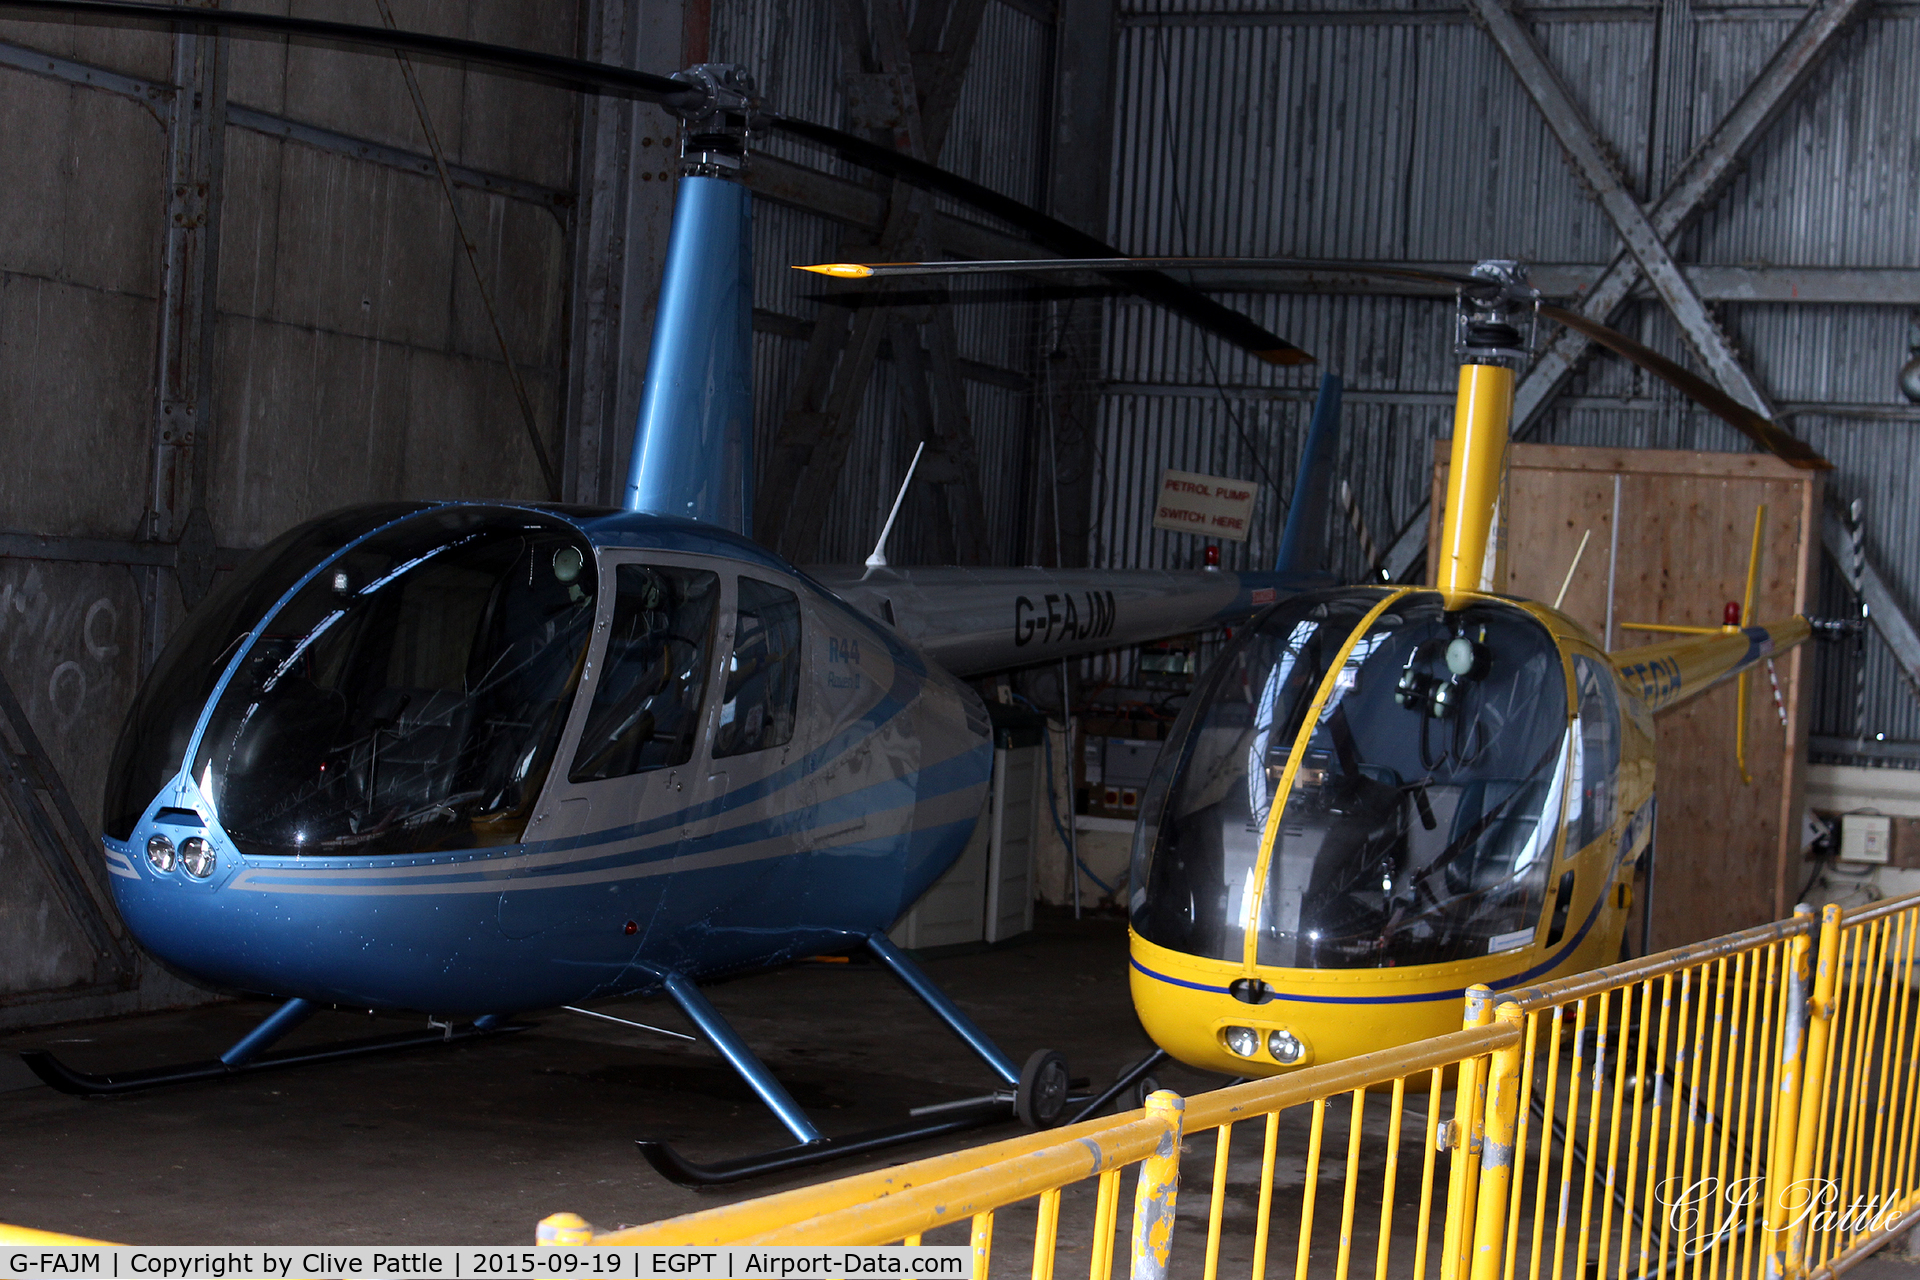 G-FAJM, 2008 Robinson R44  Raven II C/N 12394, Hangared at Perth EGPT in cramped conditions alongside based stablemate G-EFGH